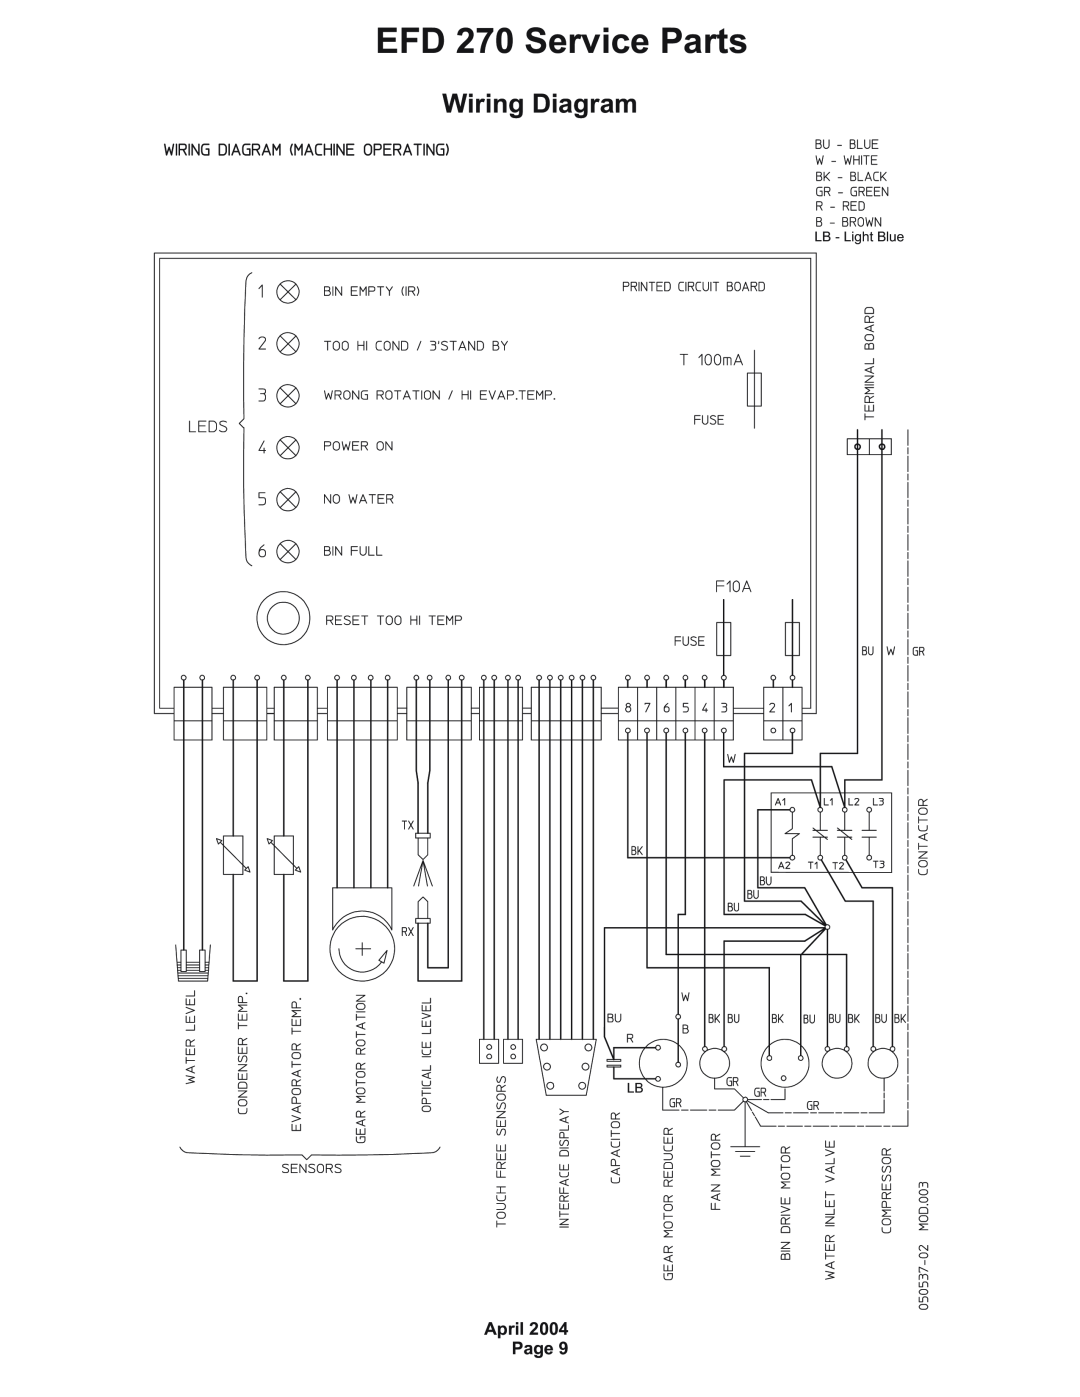 Ice-O-Matic EFD270 manual Wiring Diagram, EFD 270 Service Parts, April Page, LB - Light Blue 